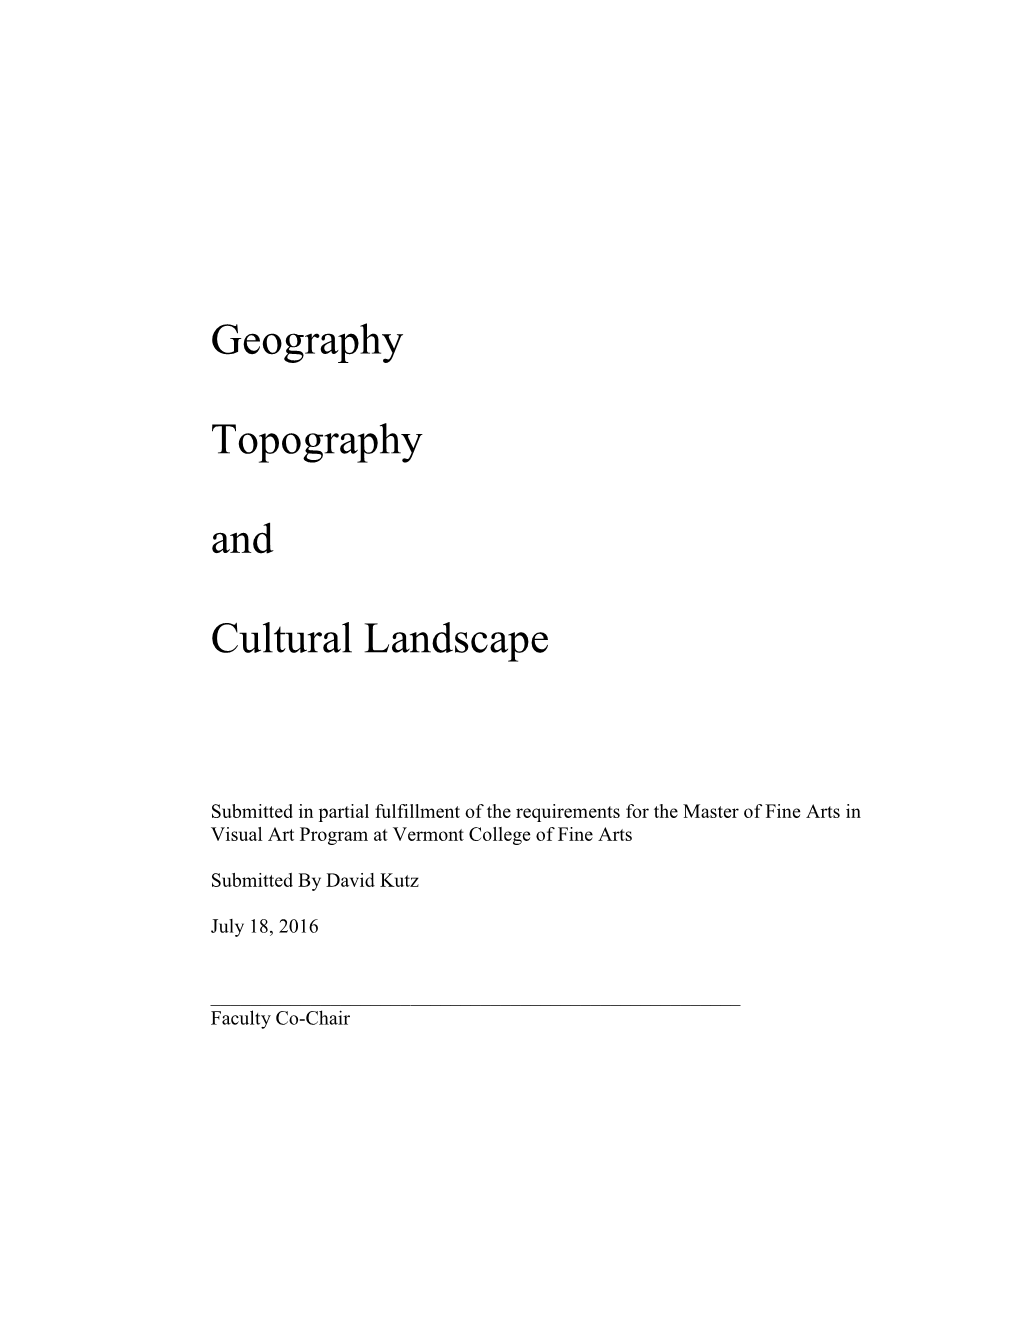 Geography Topography and Cultural Landscape